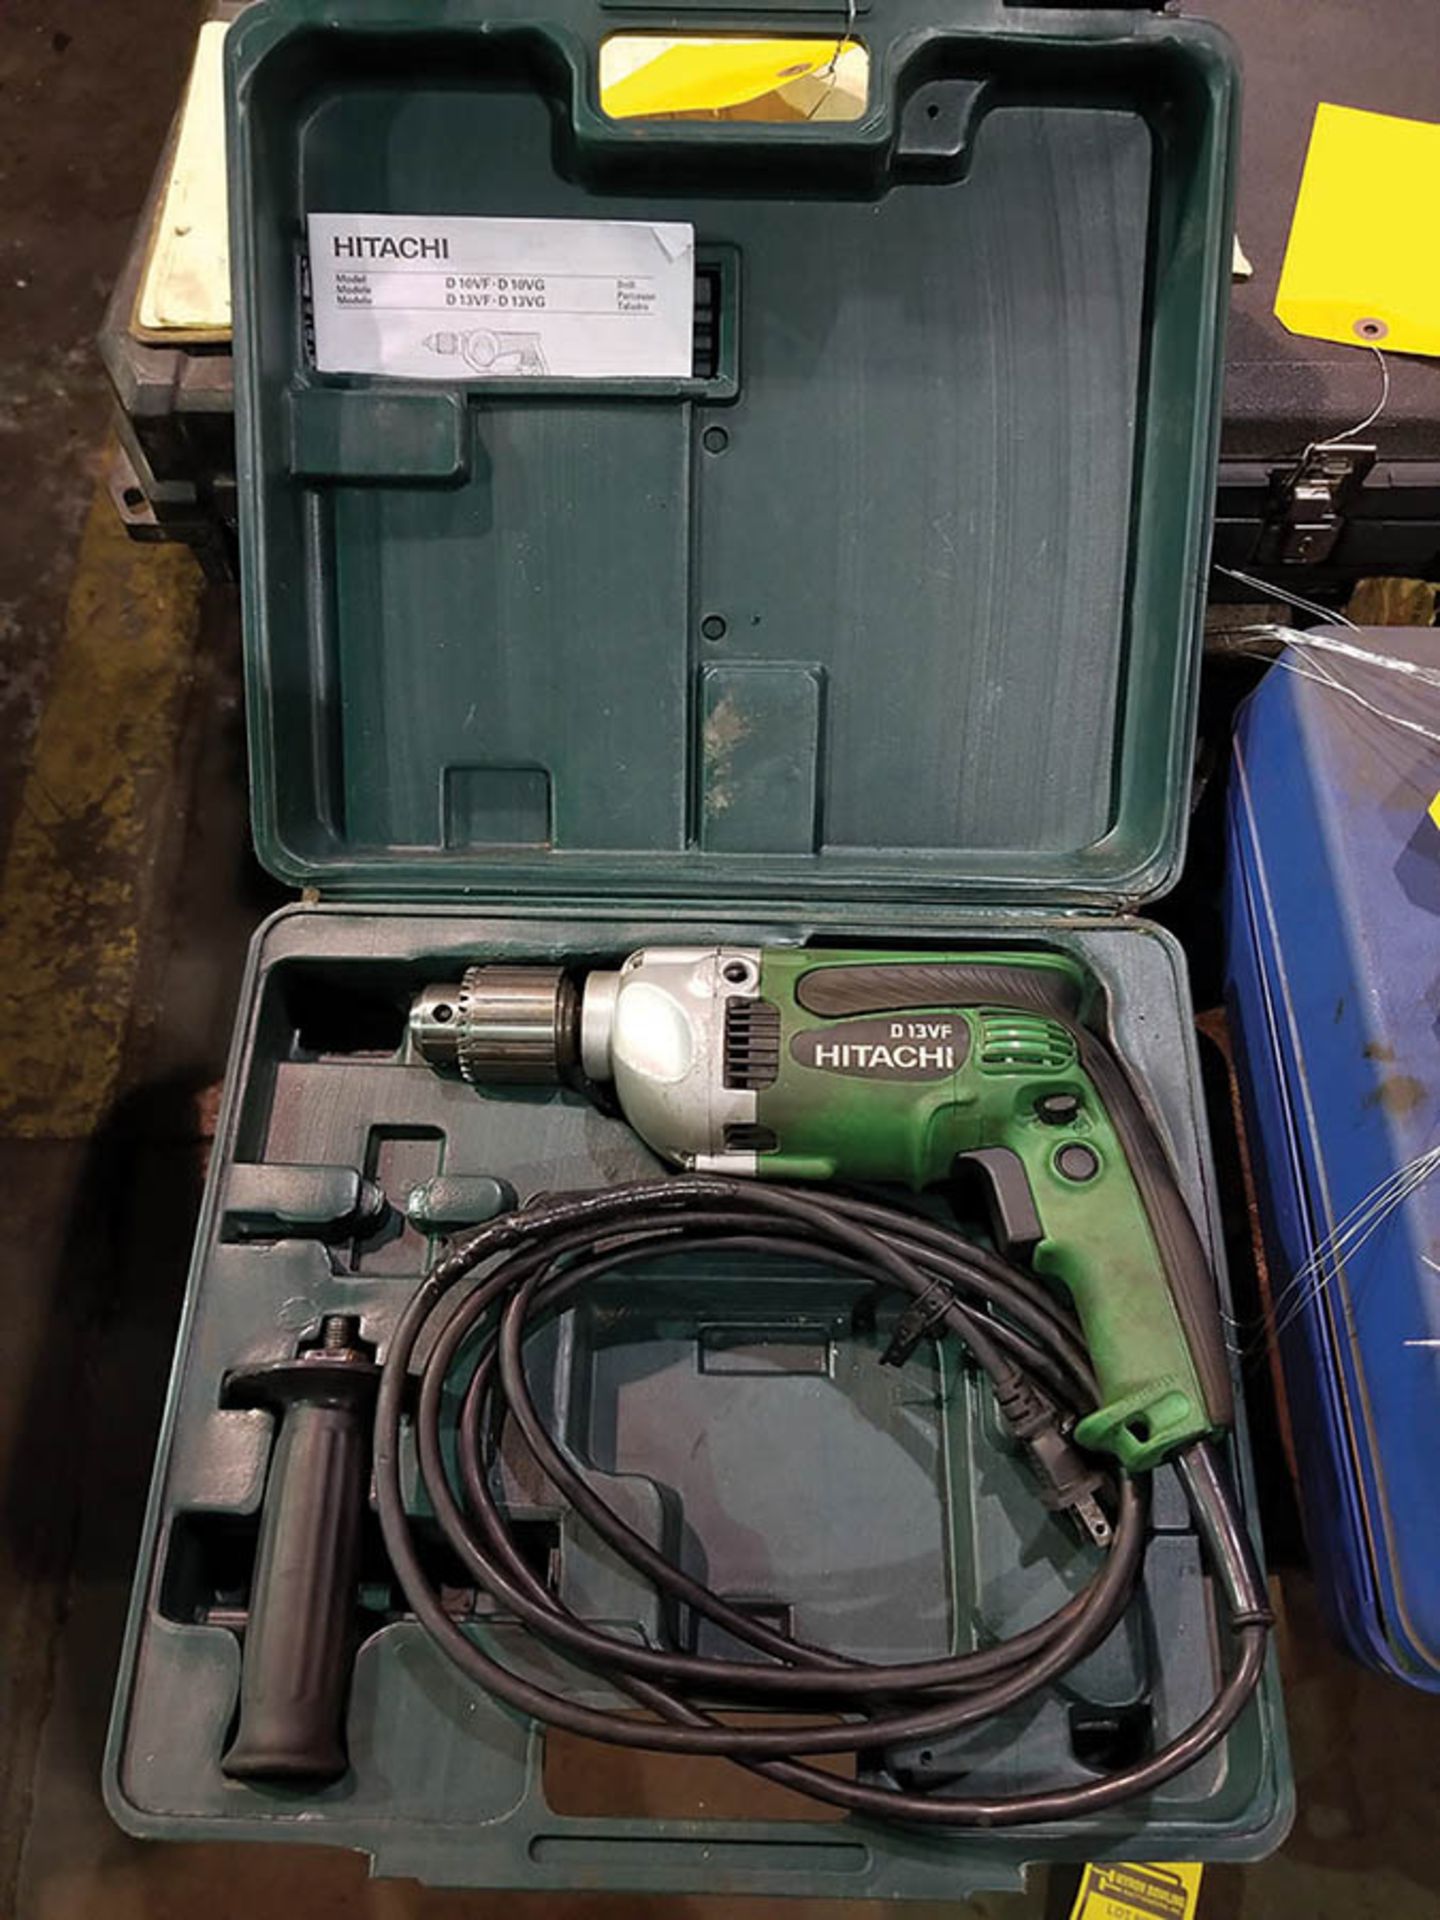 HITACHI 1/2" ELECTRIC DRILL, MODEL D13VF WITH CASE - Image 2 of 3